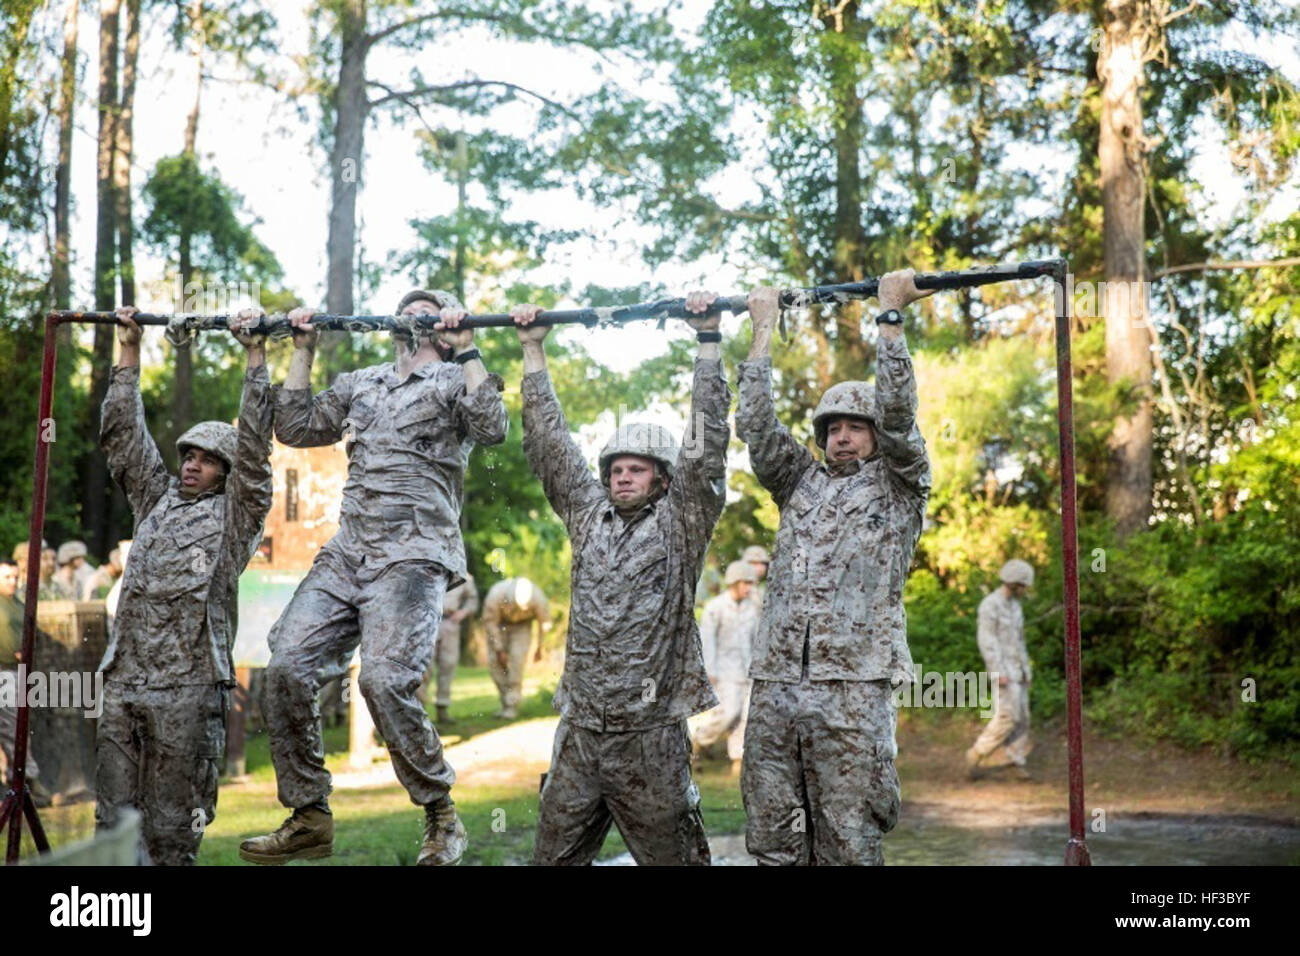 Marines with Electronics Maintenance Company, 2nd Maintenance Battalion, conduct pull-ups during the endurance course at the Battle Skills Training School aboard Camp Lejeune, N.C., May 29, 2015. ELMACO hiked approximately two miles to the school and then conducted the course to build camaraderie and say farewell to their commanding officer, Maj. Brian L. White. (U.S. Marine Corps photo by Cpl. Shawn Valosin) ELMACO conducts hike, completes endurance course 150529-M-IU187-029 Stock Photo